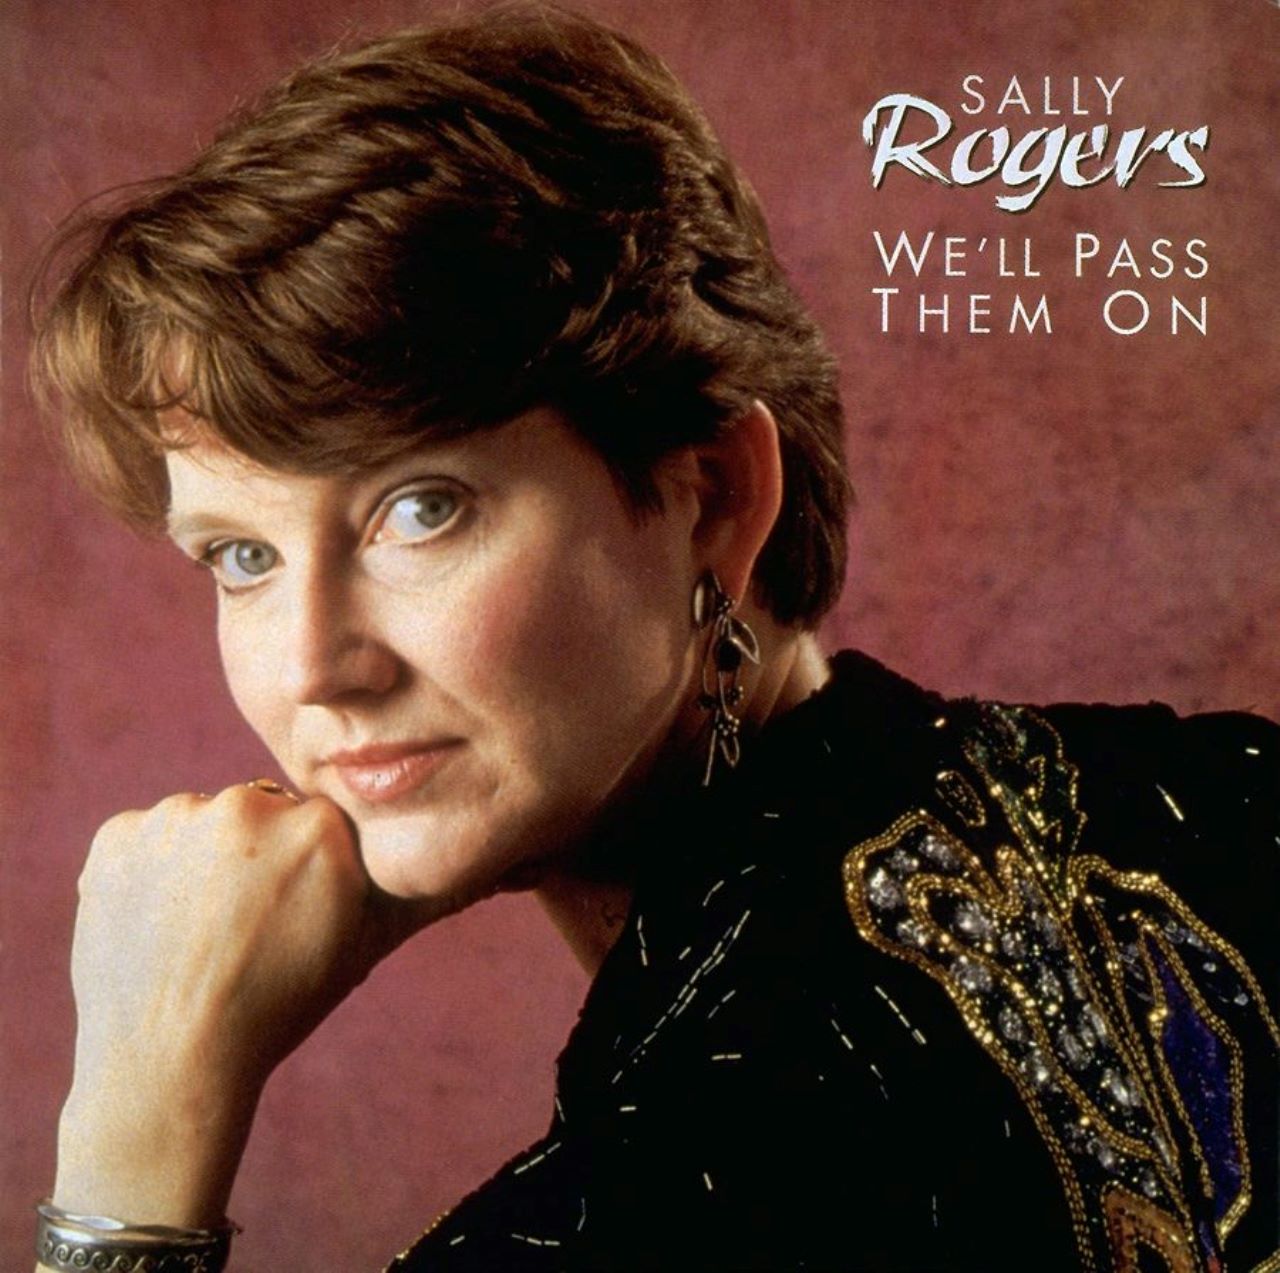 Sally Rogers - We'll Pass Them On cover album